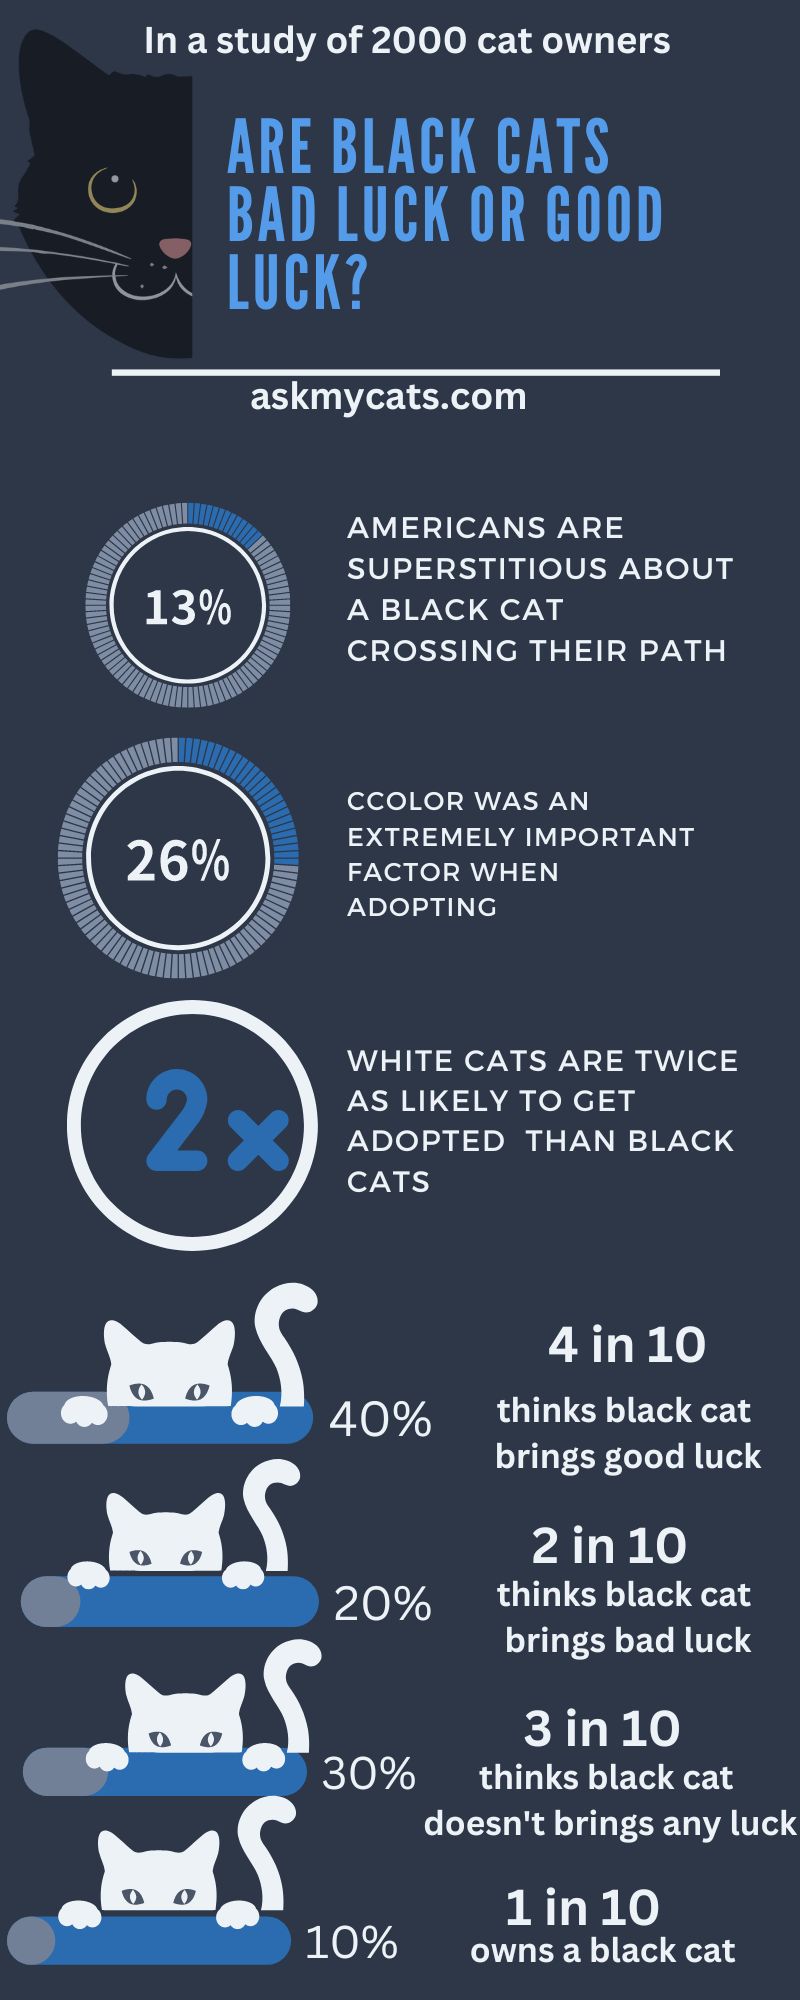 ARE BLACK CATS BAD LUCK (Infographic)